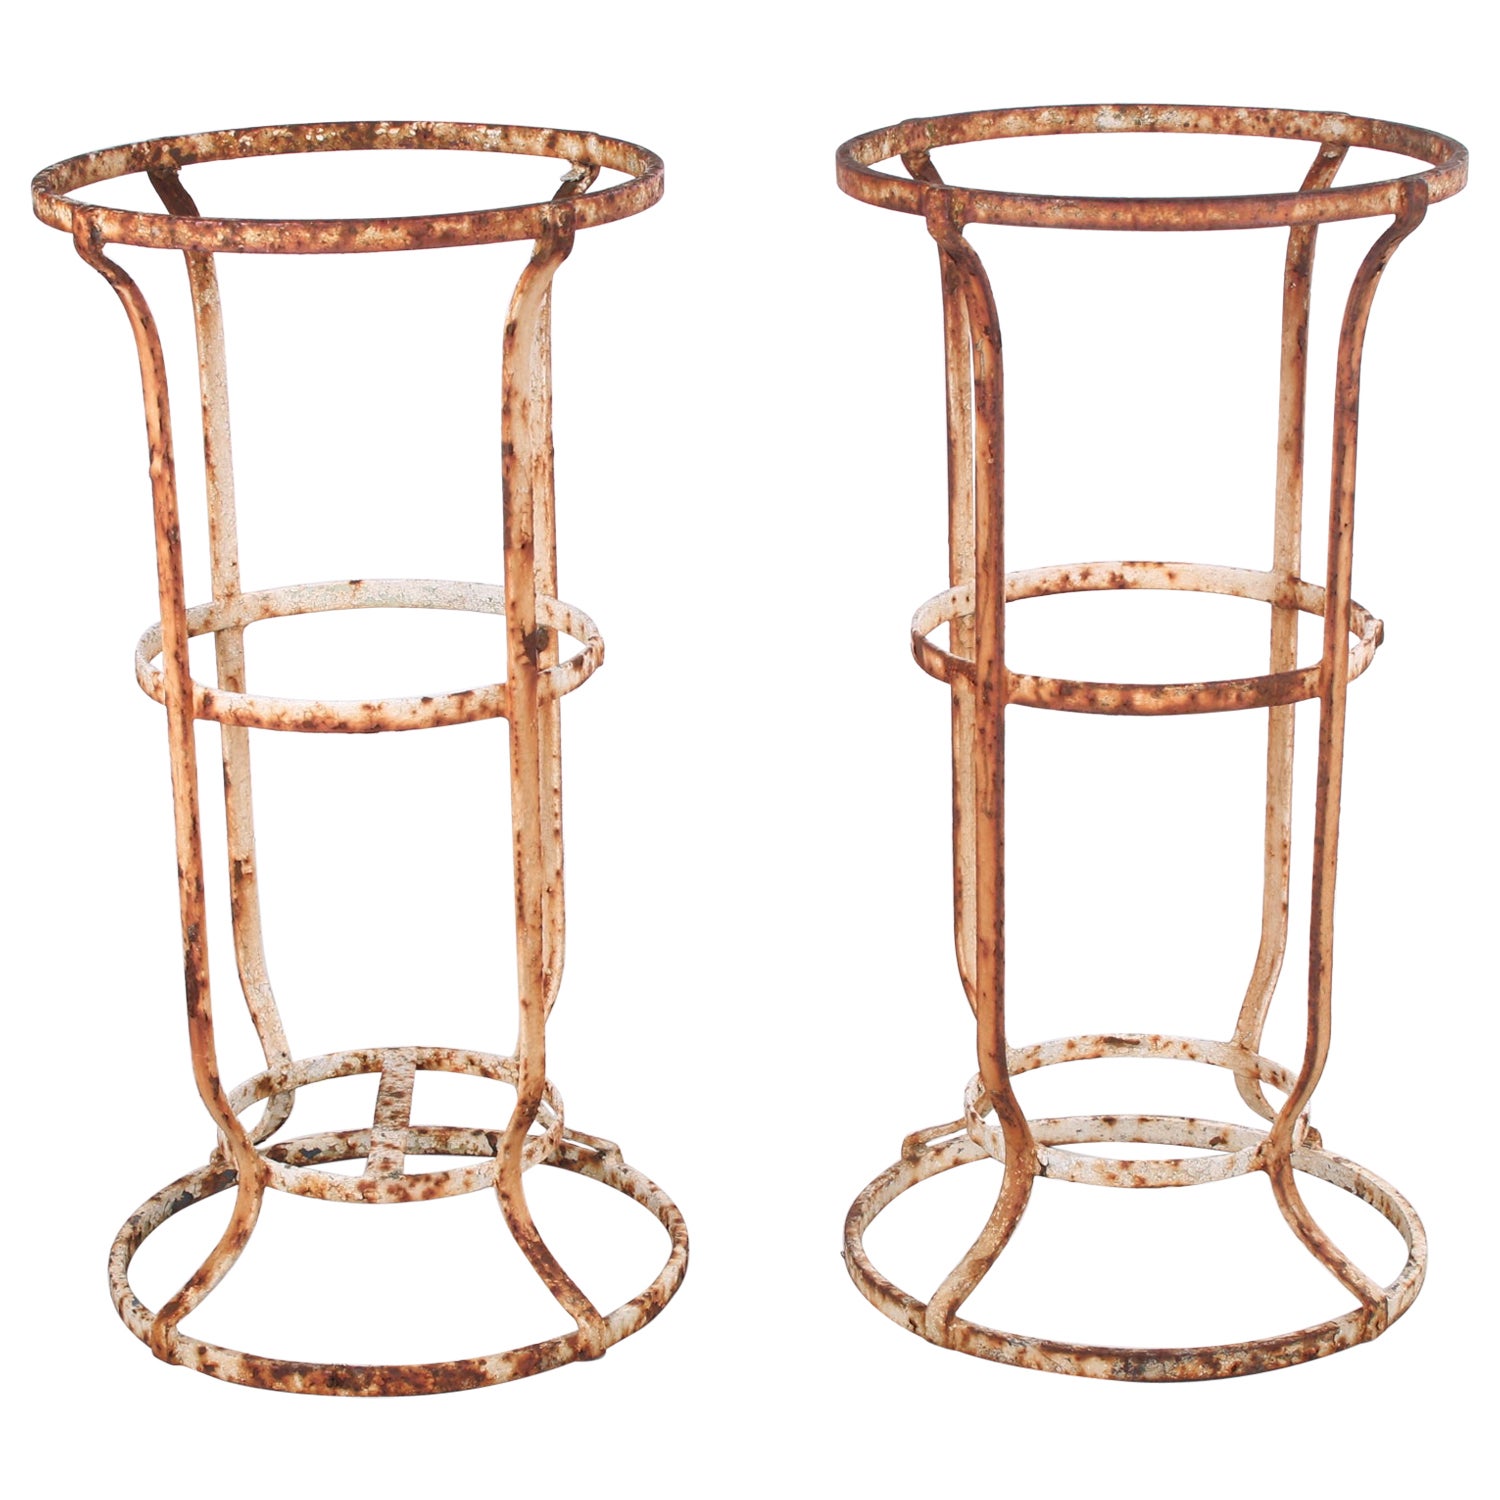 Very Old Wrought Iron French Garden Stand, a Set of 2 with Beautiful Patina For Sale